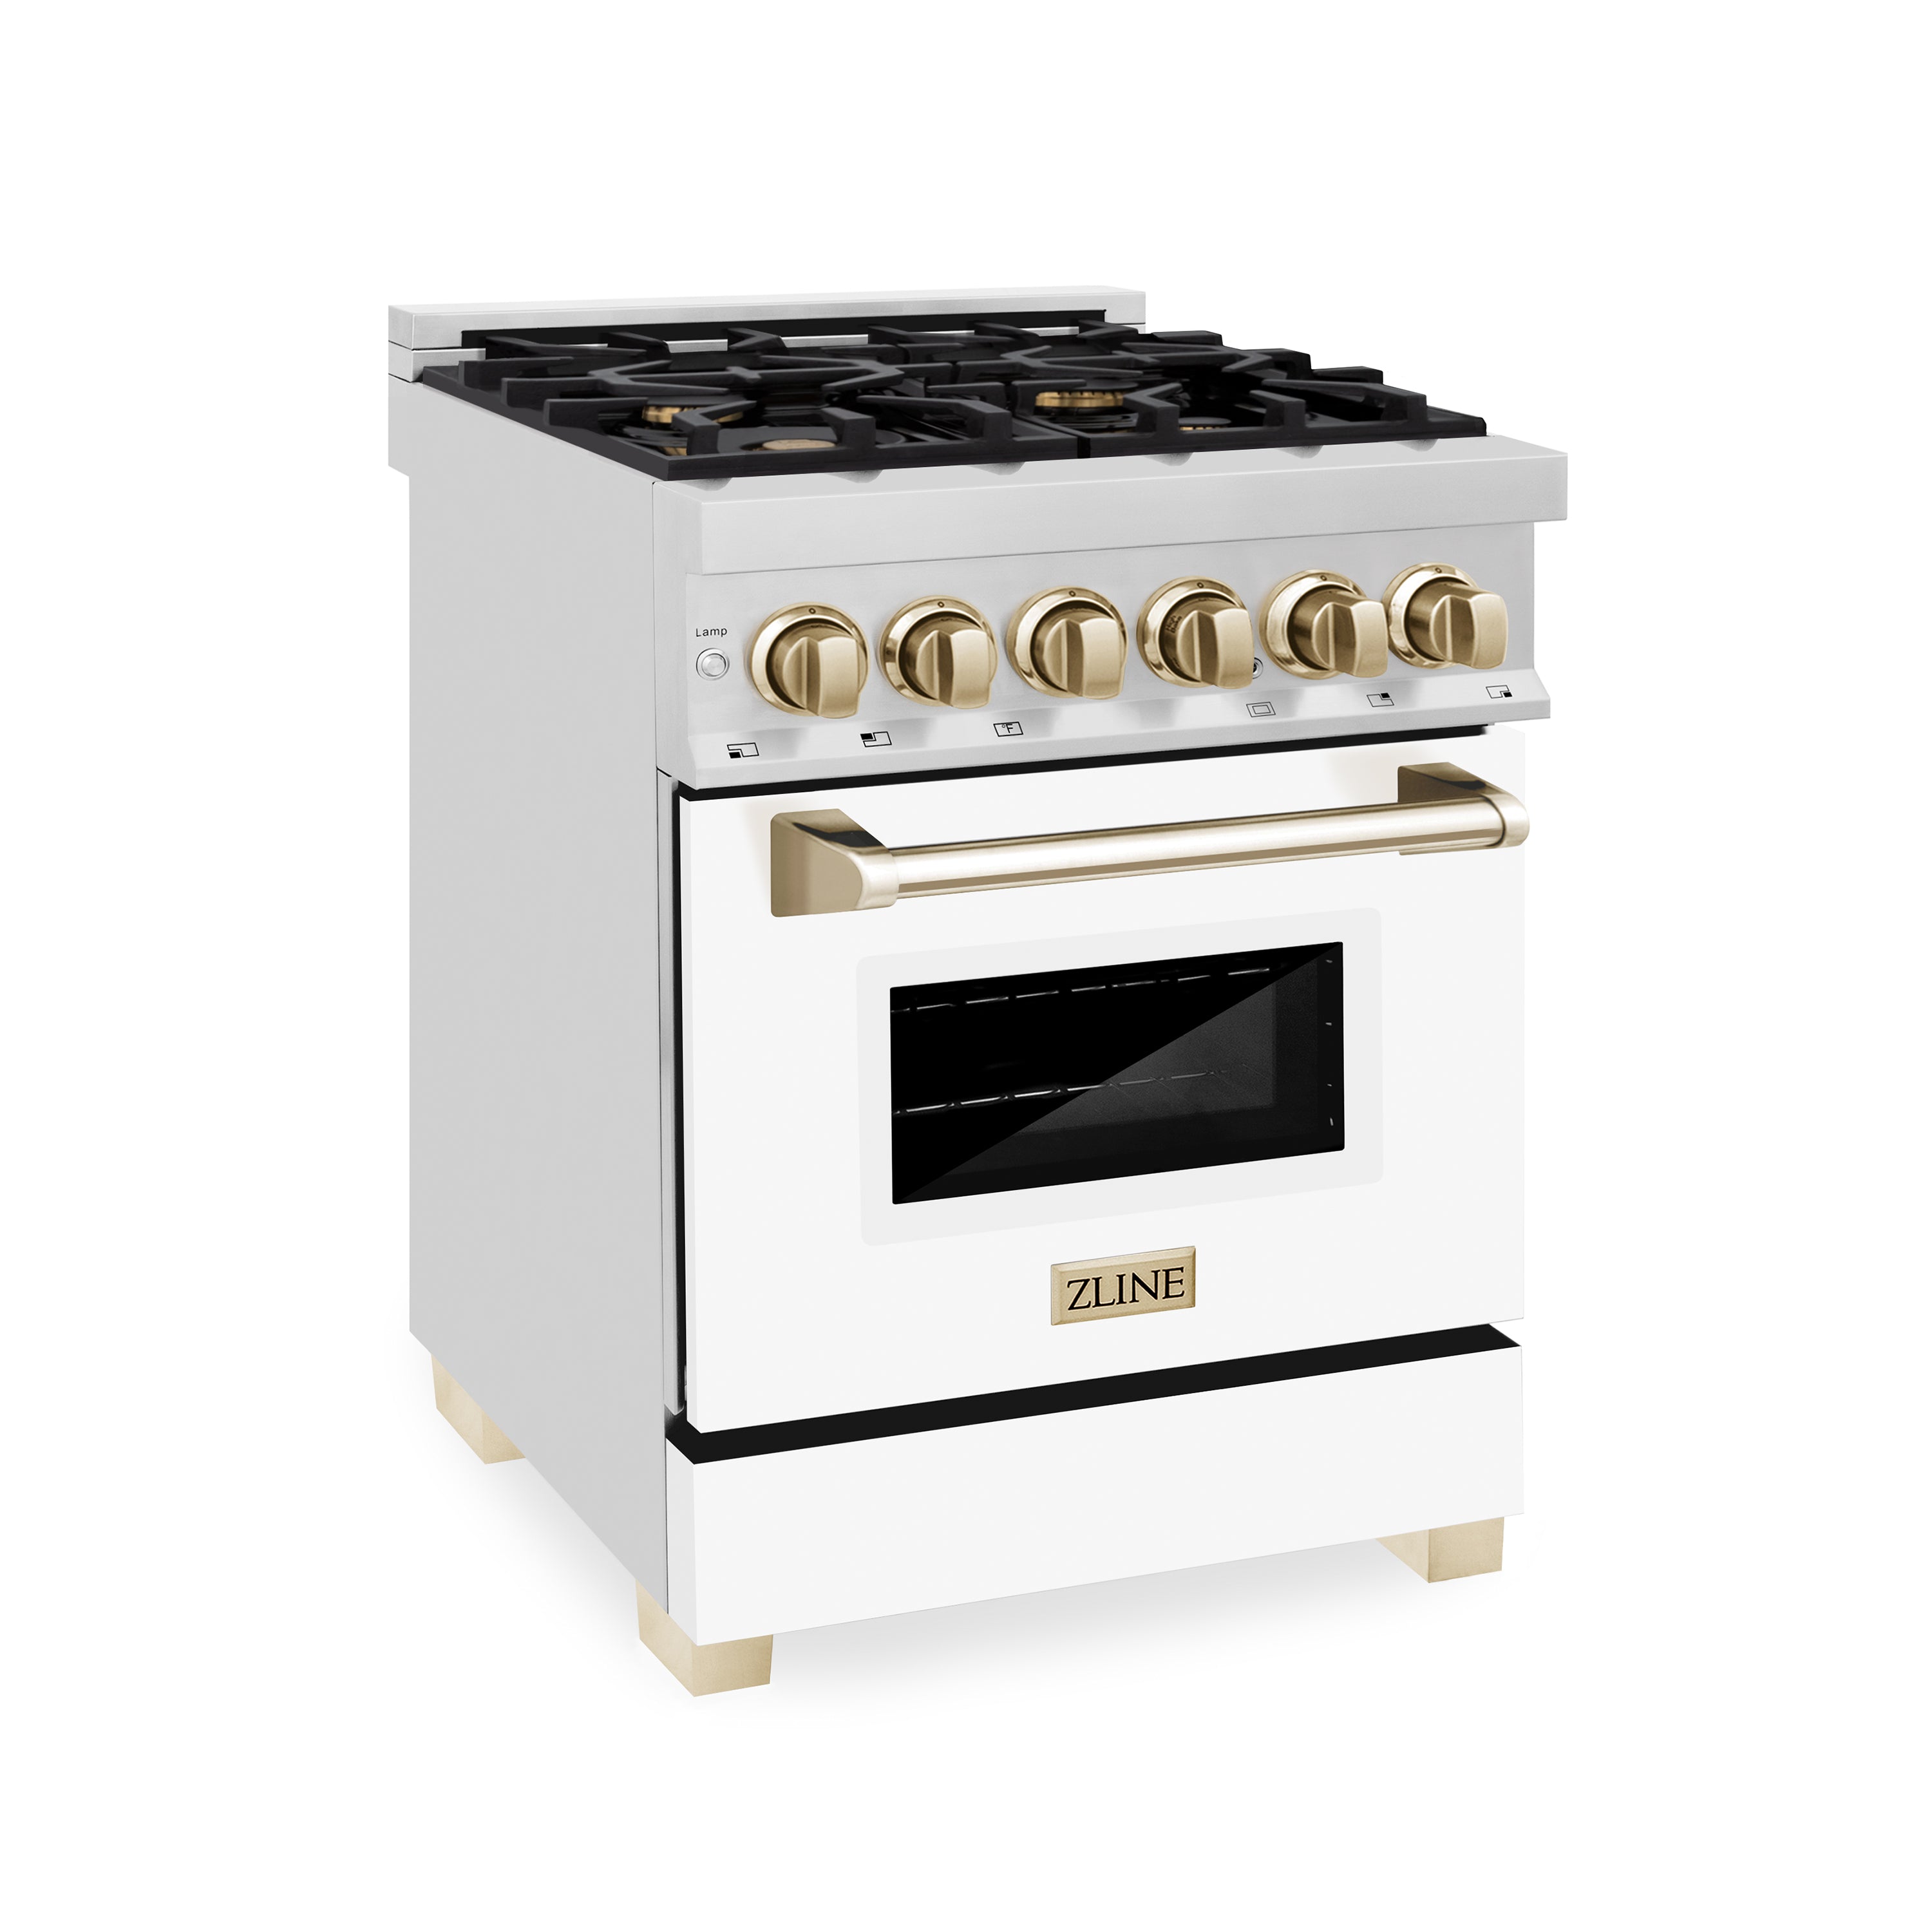 ZLINE Autograph Edition 24" 2.8 cu. ft. Dual Fuel Range with Gas Stove and Electric Oven in Stainless Steel with White Matte Door and Gold Accents (RAZ-WM-24-G)